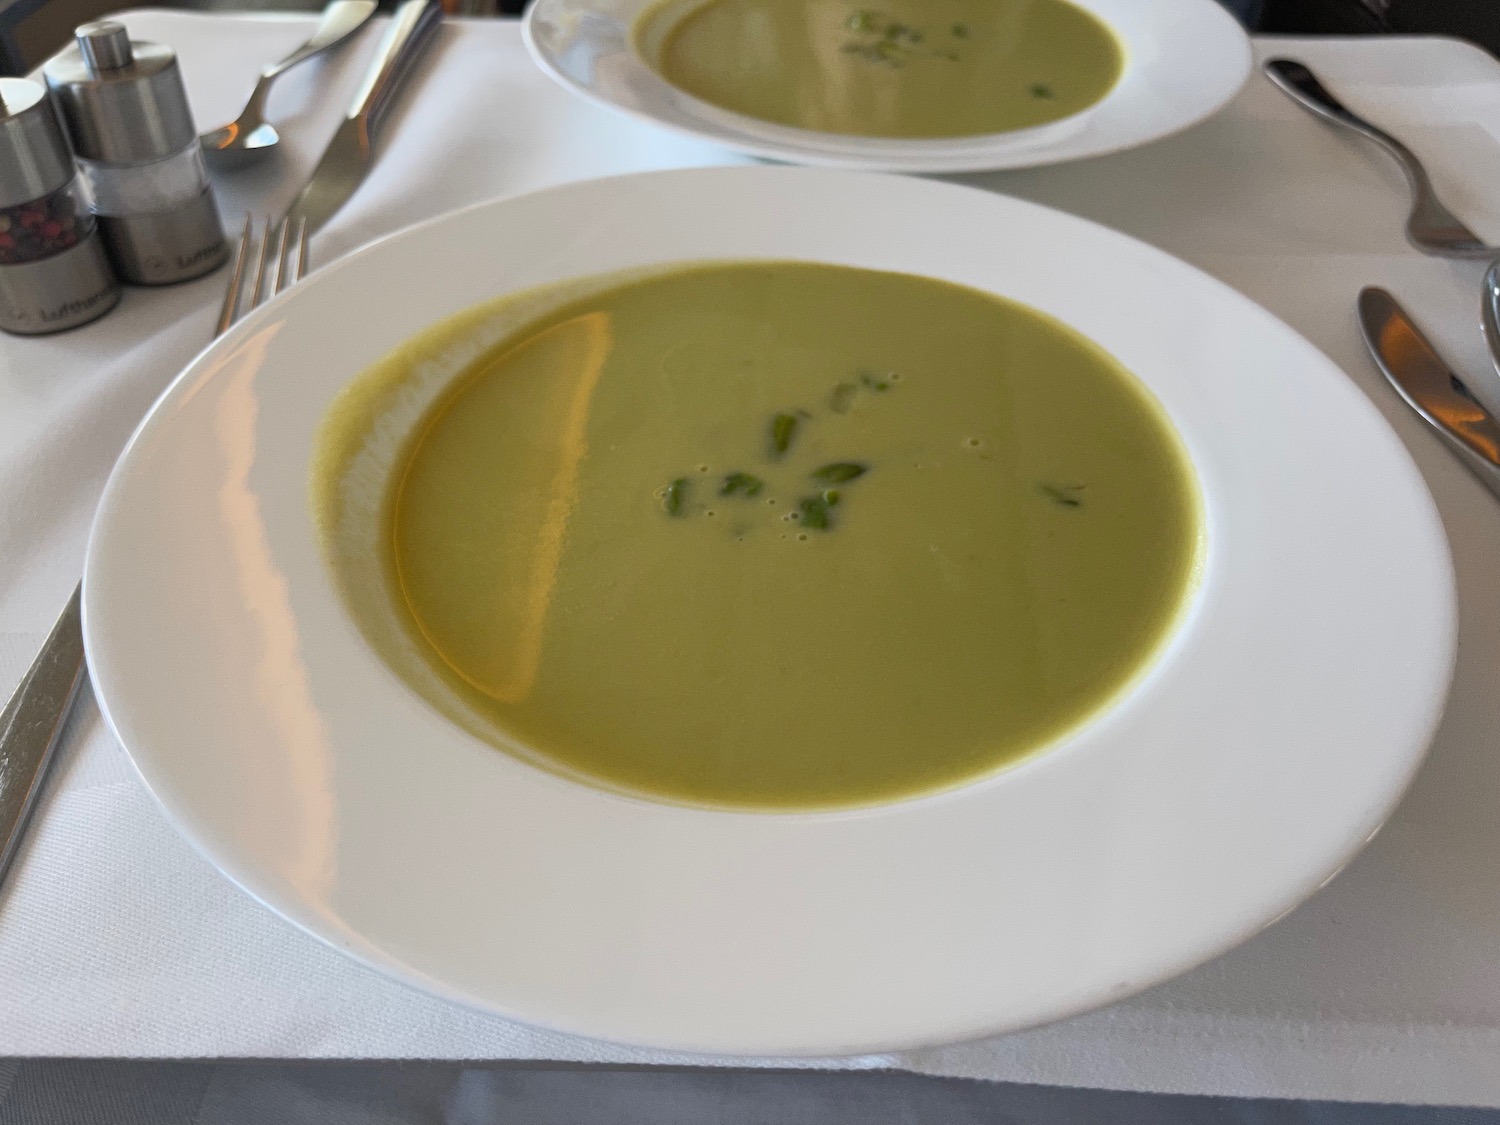 two plates of soup on a table